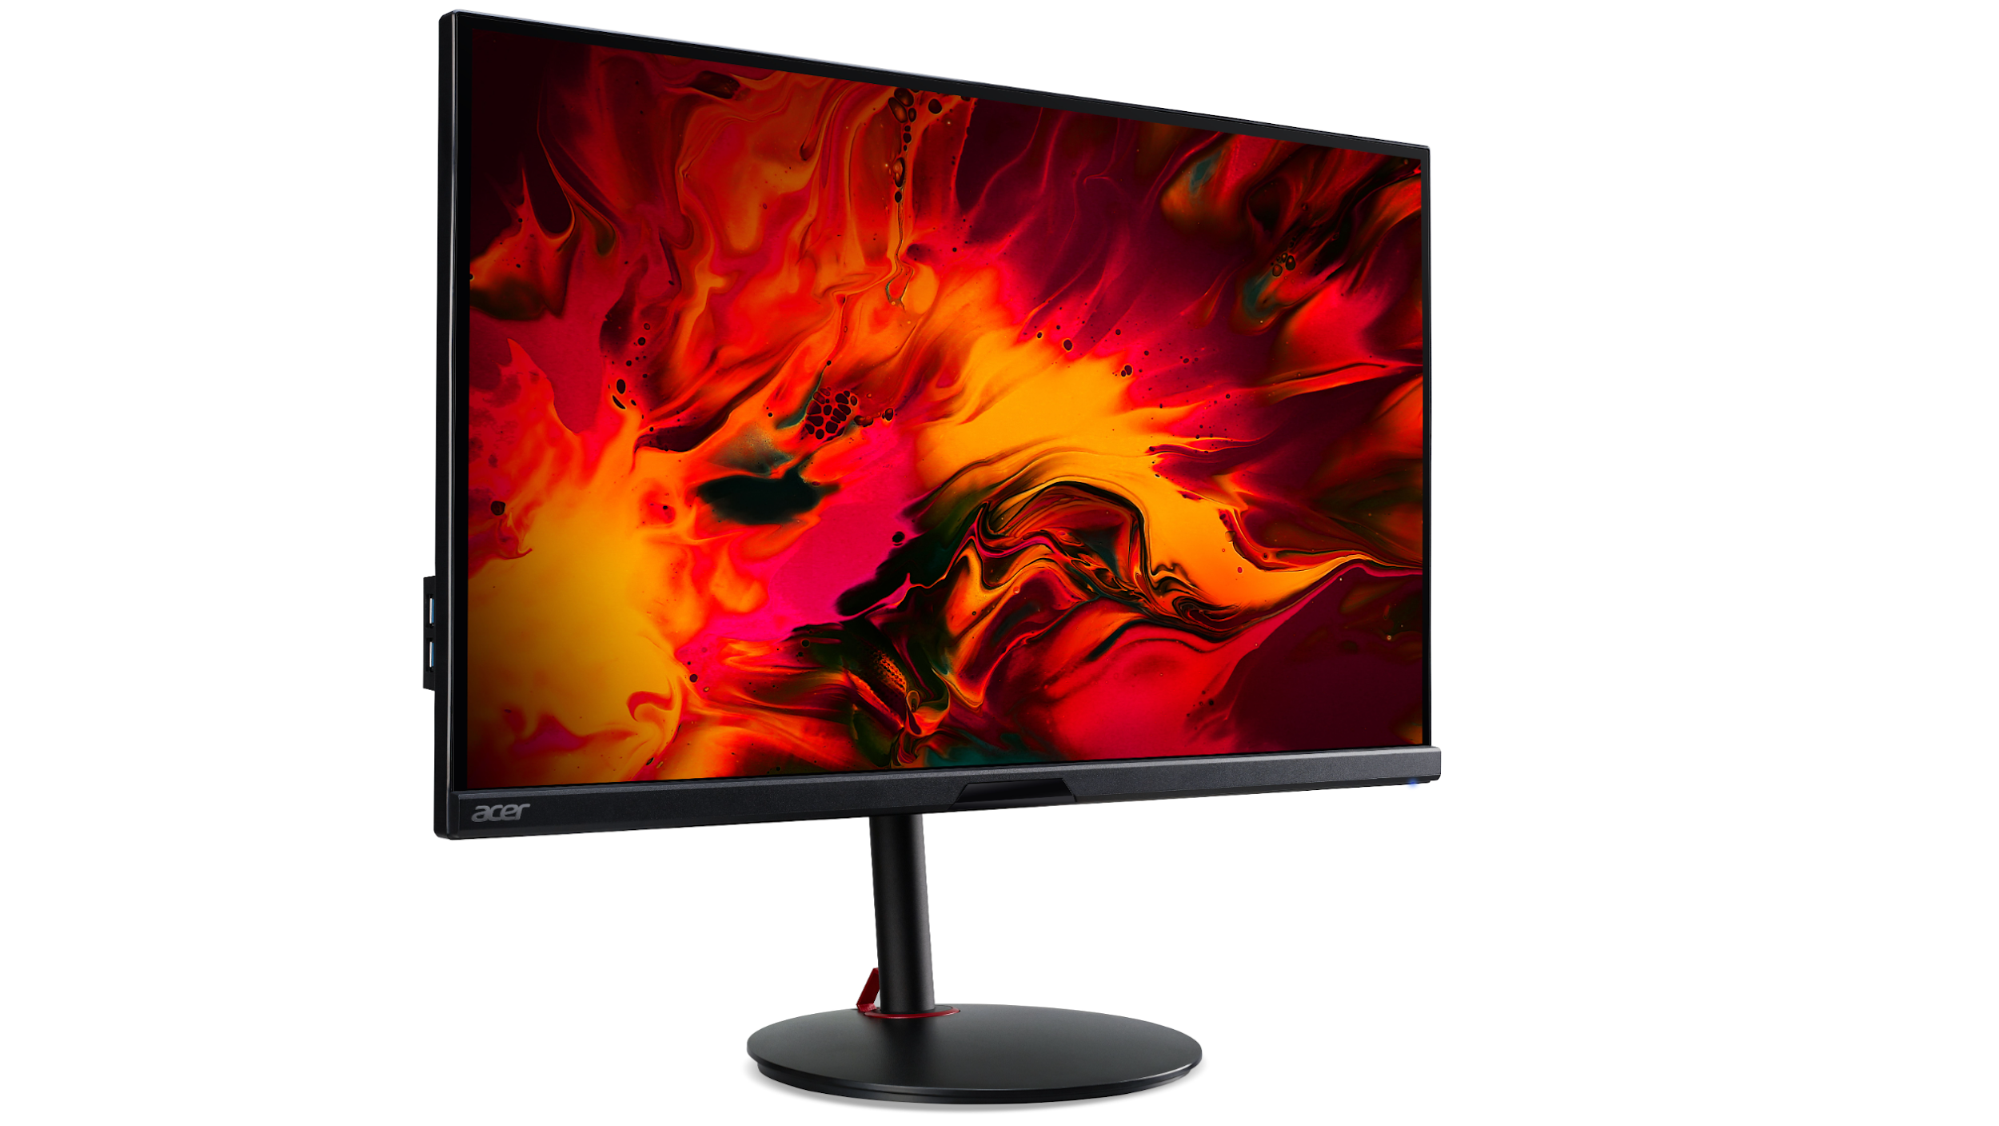 Acer Reveals Its First HDMI 2.1 Monitor, Capable Of 4K And 144Hz - GameSpot